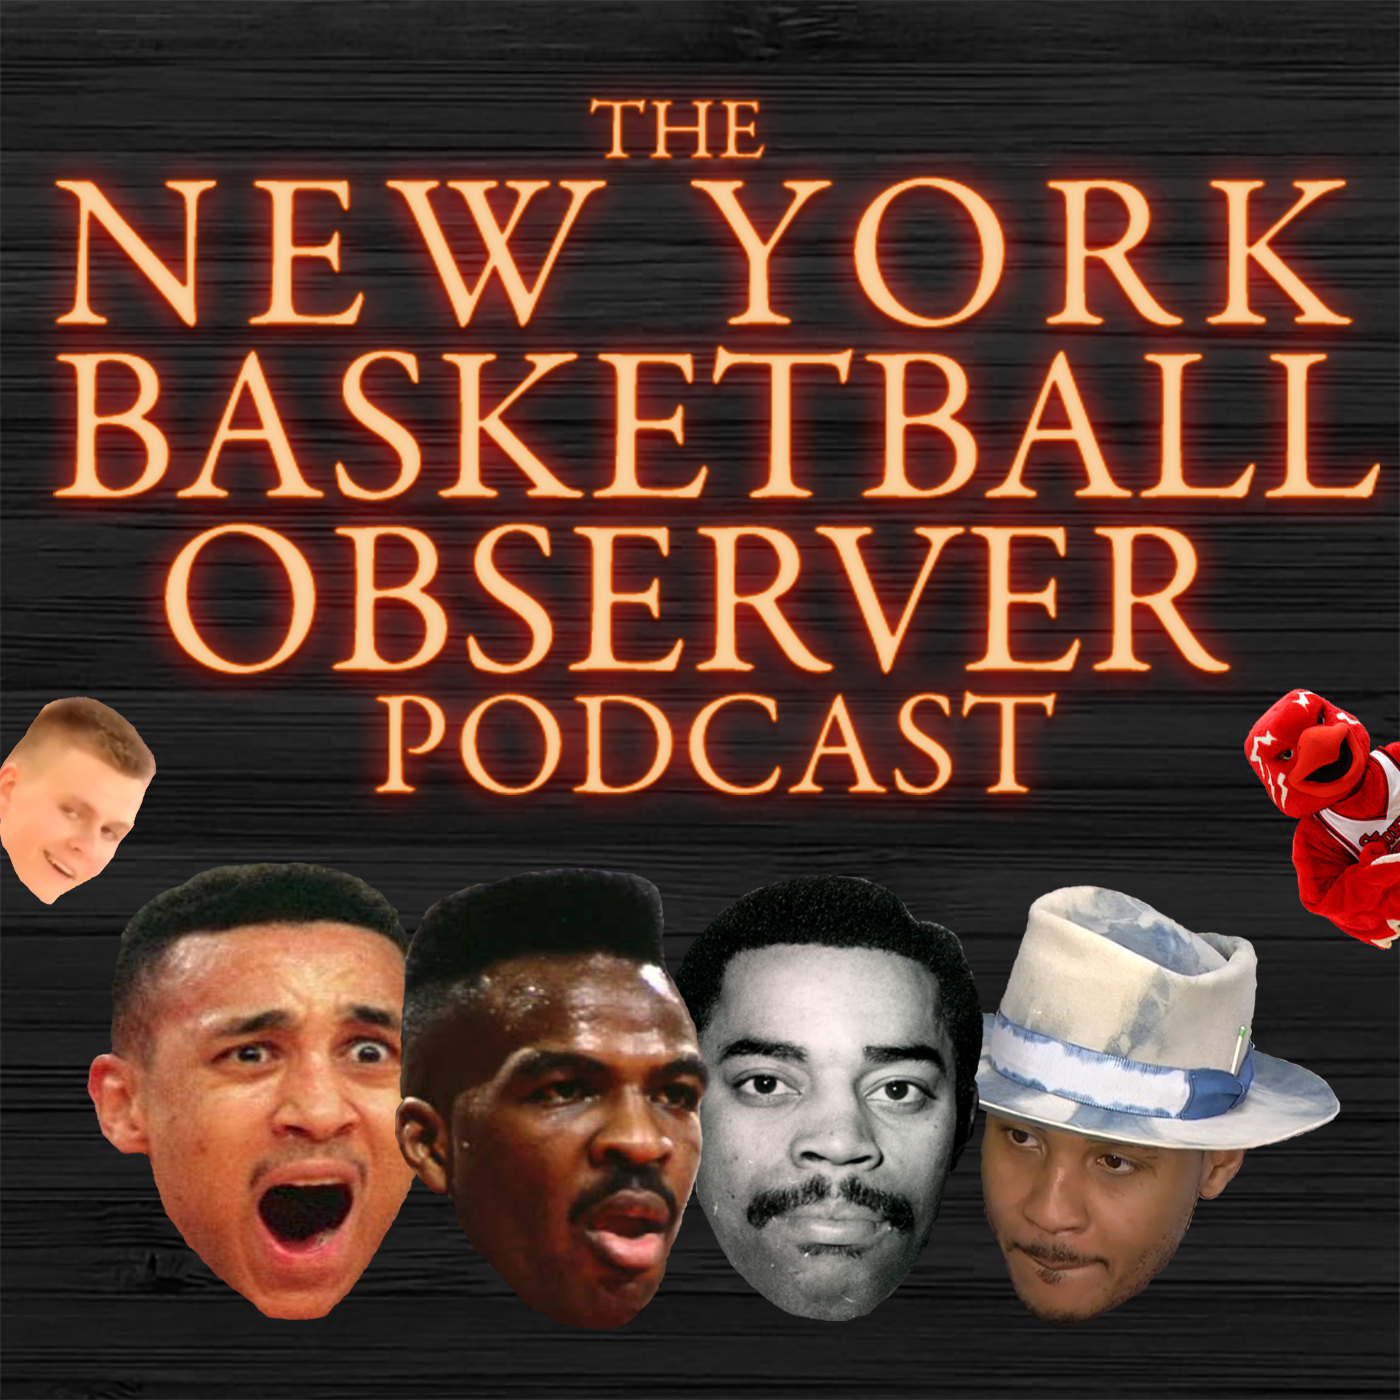 EPISODE 3 - (PART 2 OF 2) WHAT EACH KNICK SHOULD WORK ON THIS SUMMER